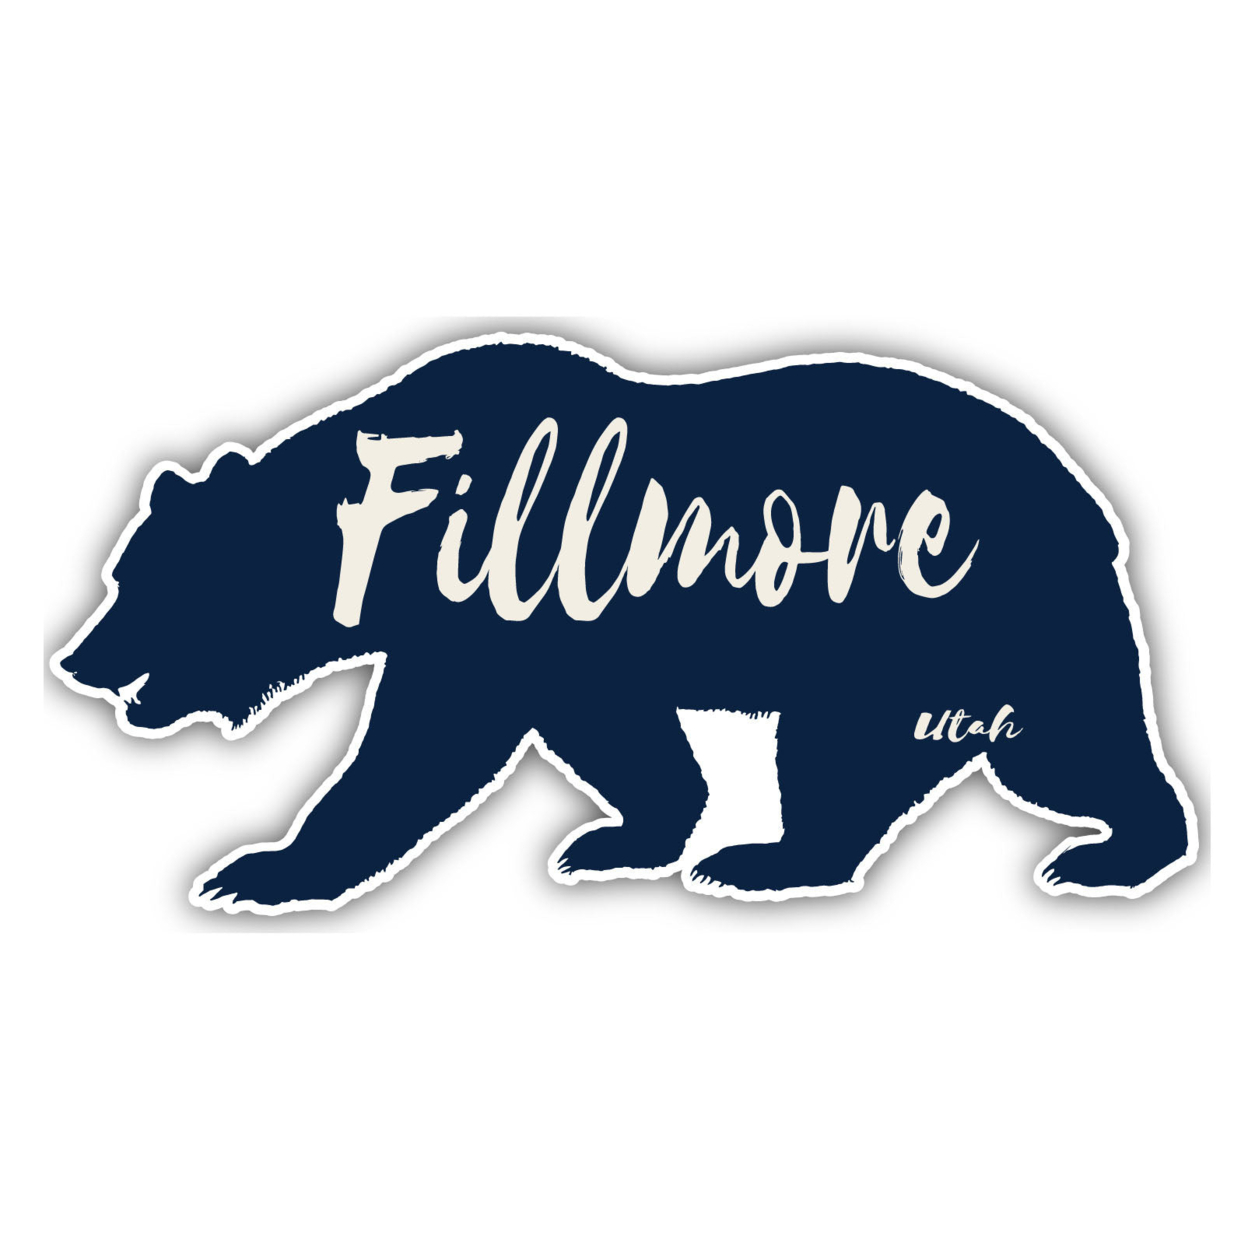 Fillmore Utah Souvenir Decorative Stickers (Choose Theme And Size) - 4-Pack, 6-Inch, Bear